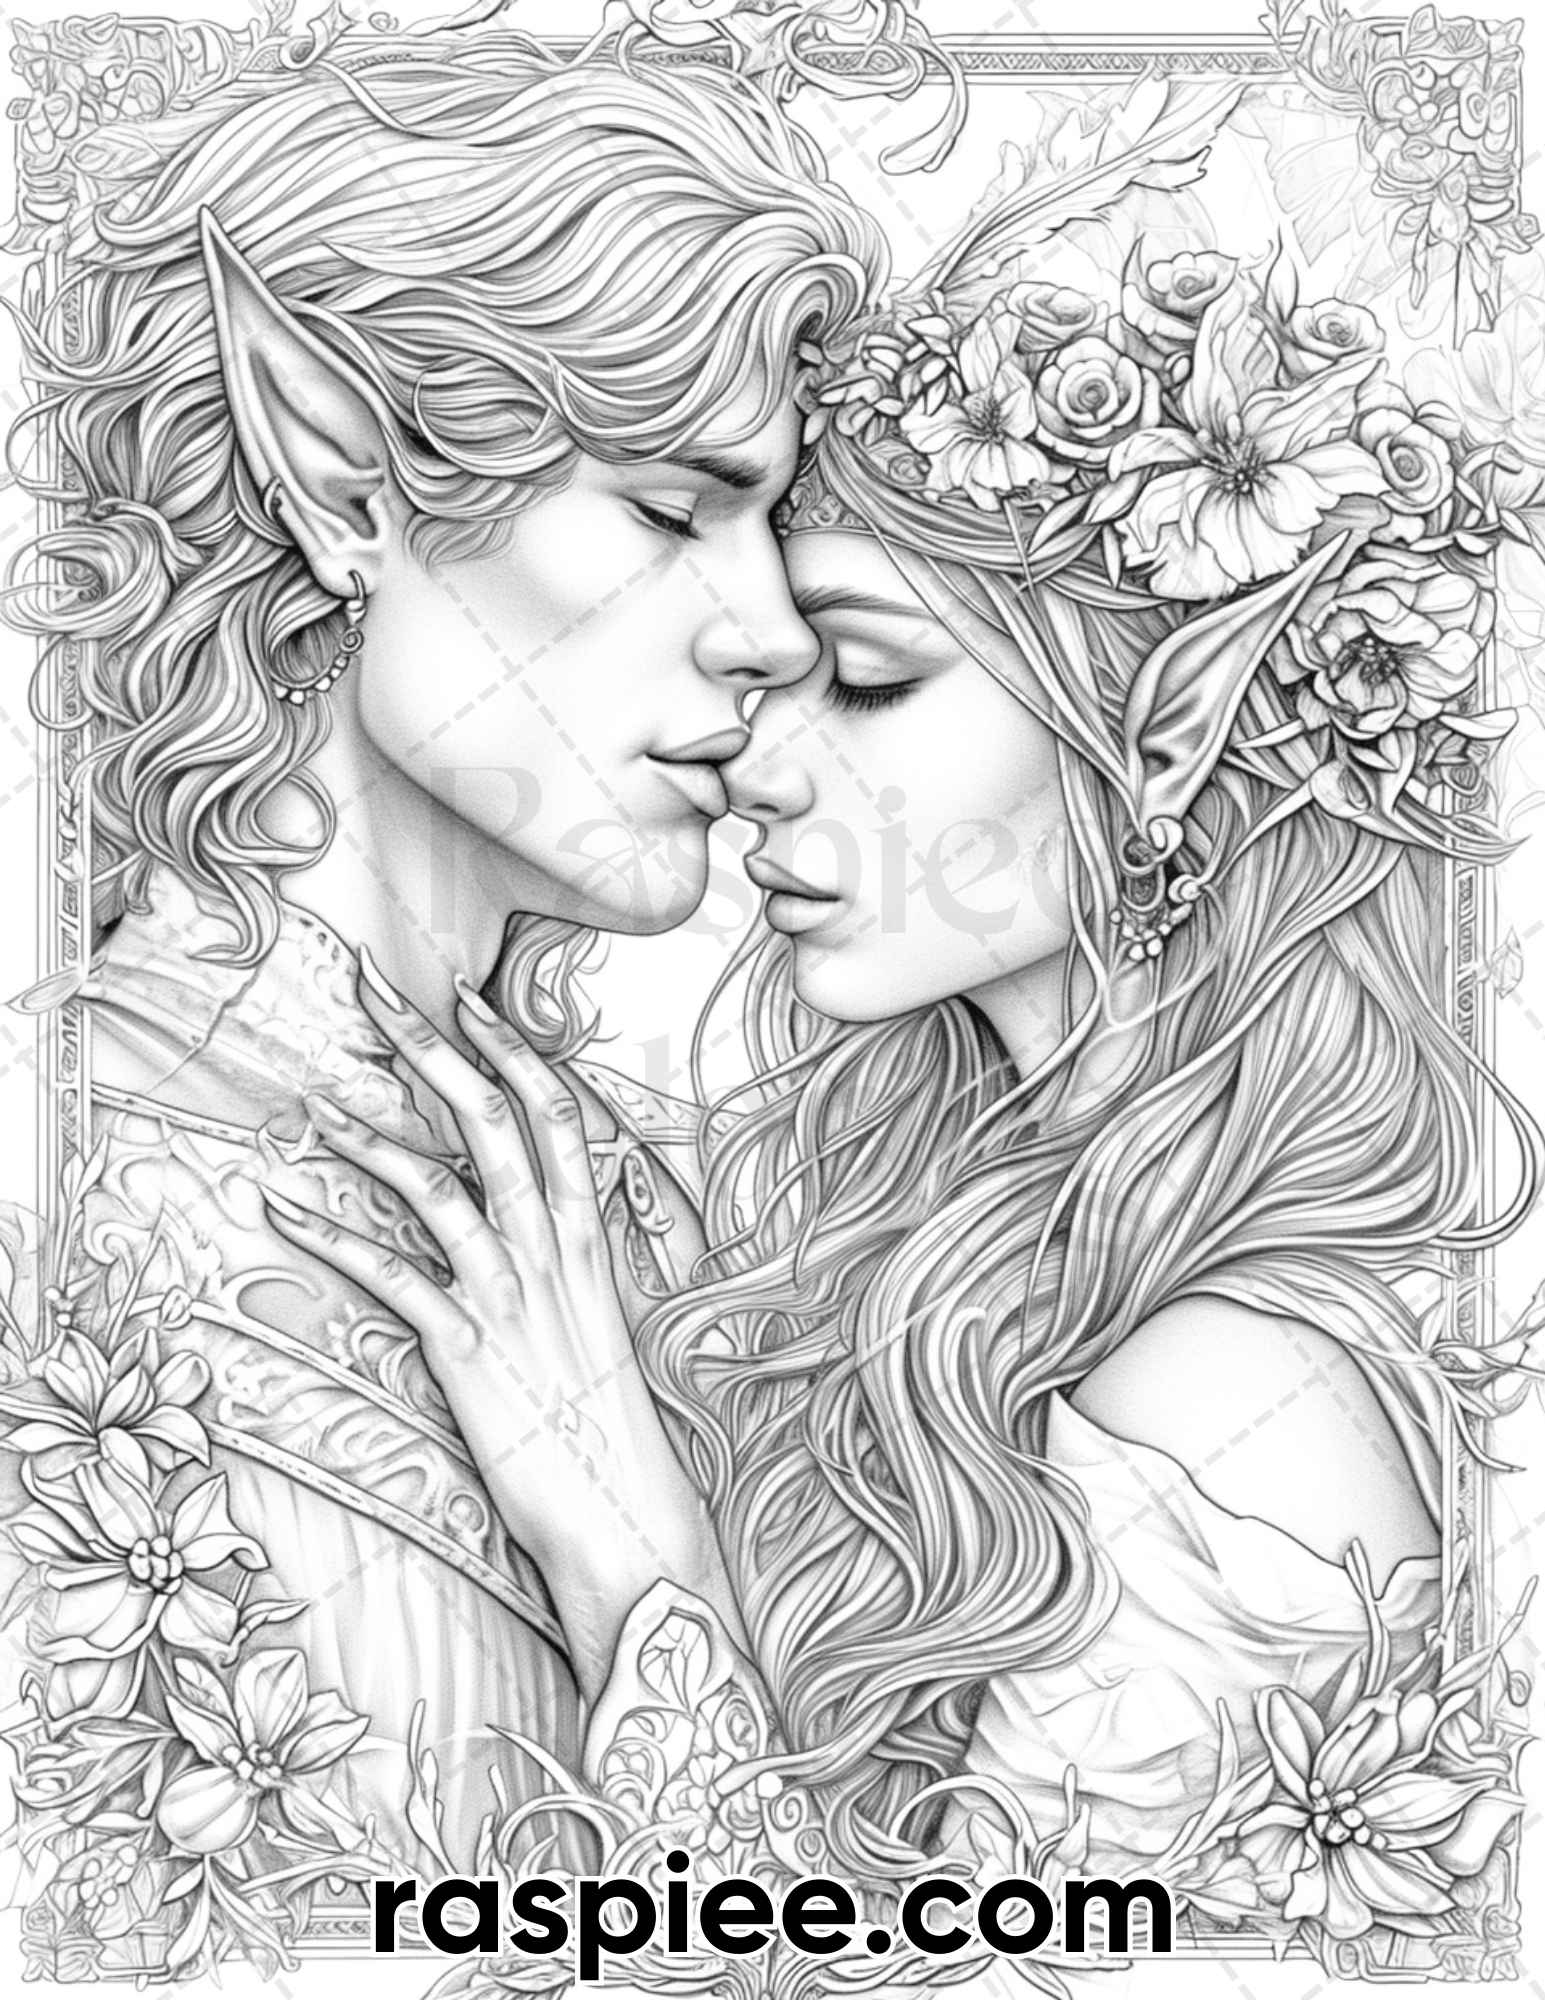 adult coloring pages, adult coloring sheets, adult coloring book pdf, adult coloring book printable, grayscale coloring pages, grayscale coloring books, fantasy coloring pages for adults, fantasy coloring book, portrait landscapes coloring pages, portrait coloring book, Romantic Elf Couple Portraits Adult Coloring Page